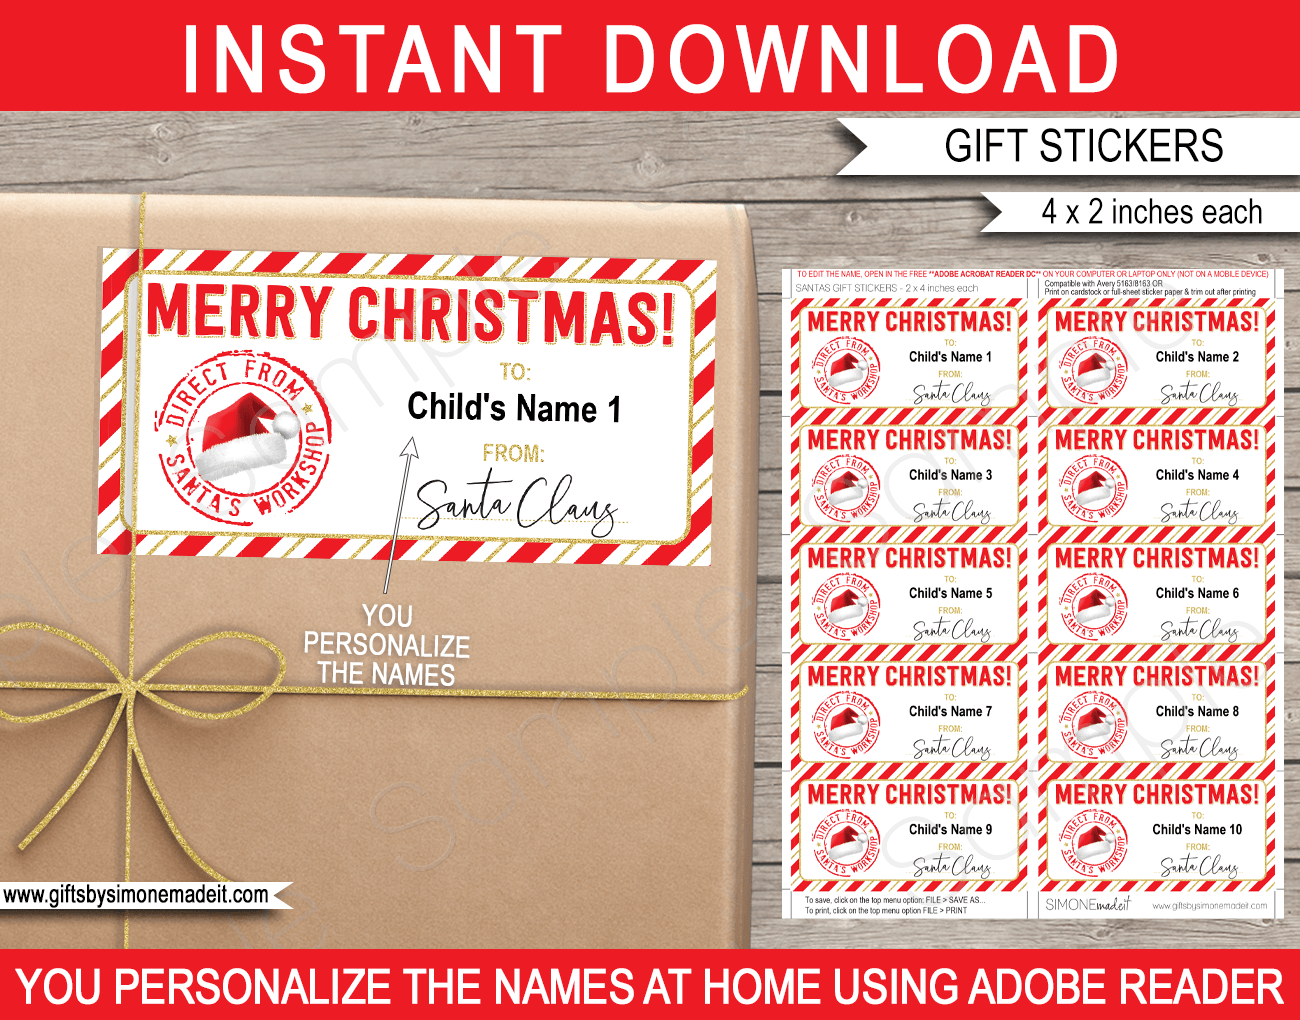 https://www.giftsbysimonemadeit.com/wp-content/uploads/2021/11/Santa-Gift-Tags-Christmas-Template-RED-GOLD.png